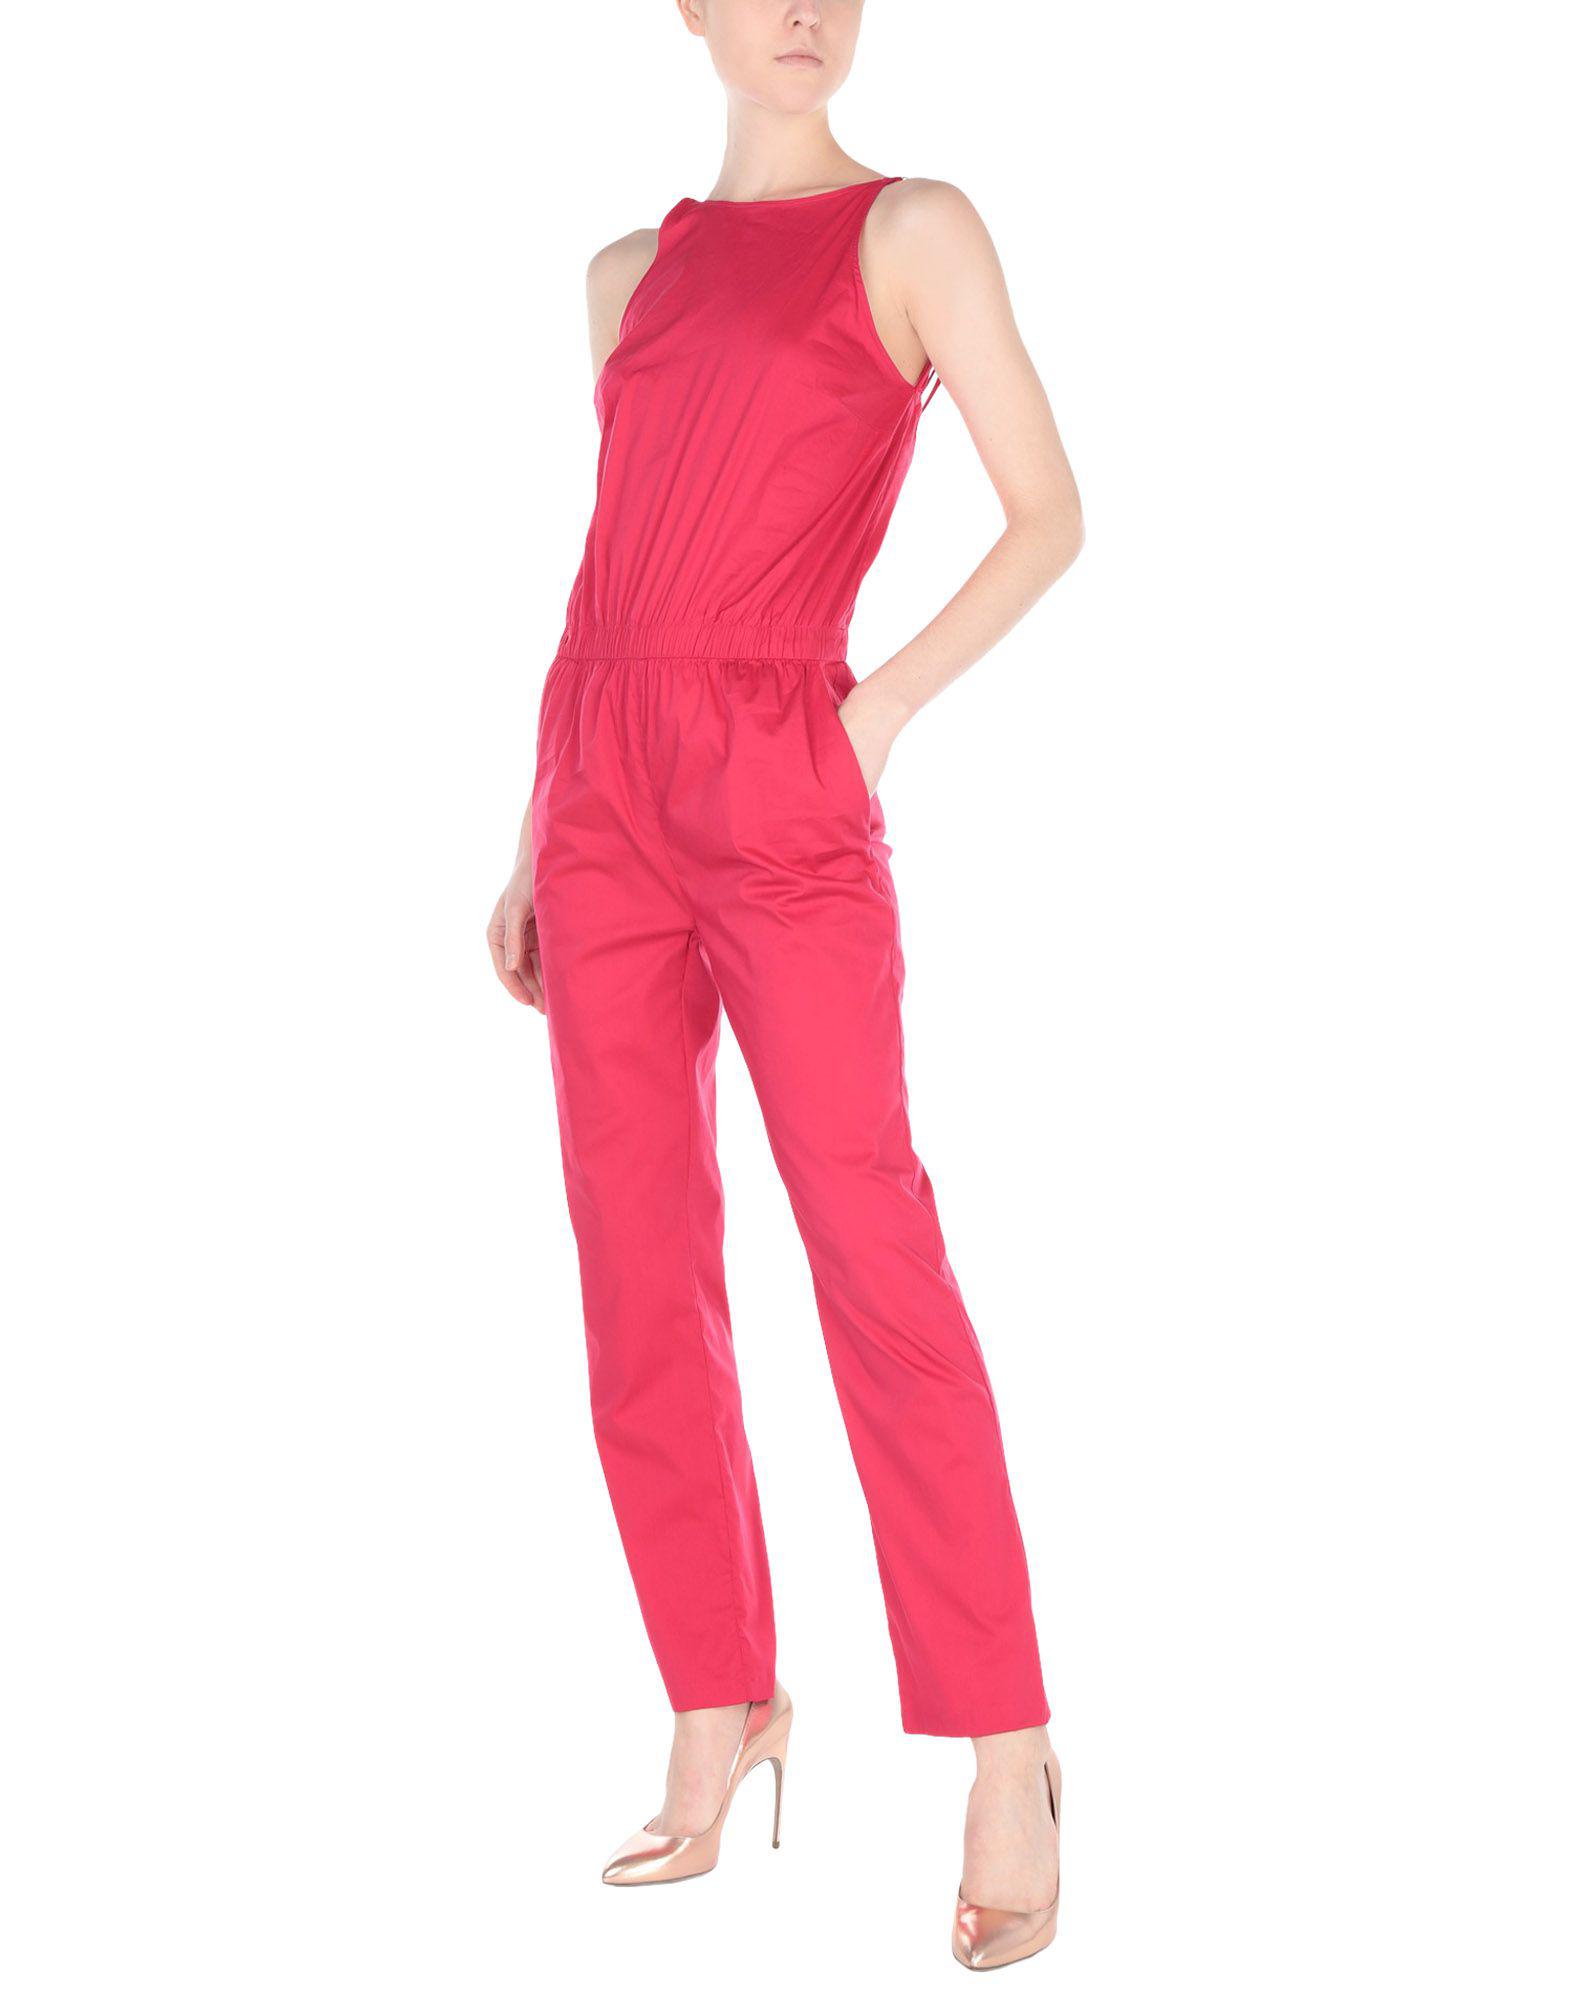 Patrizia Pepe Cotton Jumpsuit in Coral (Pink) - Lyst